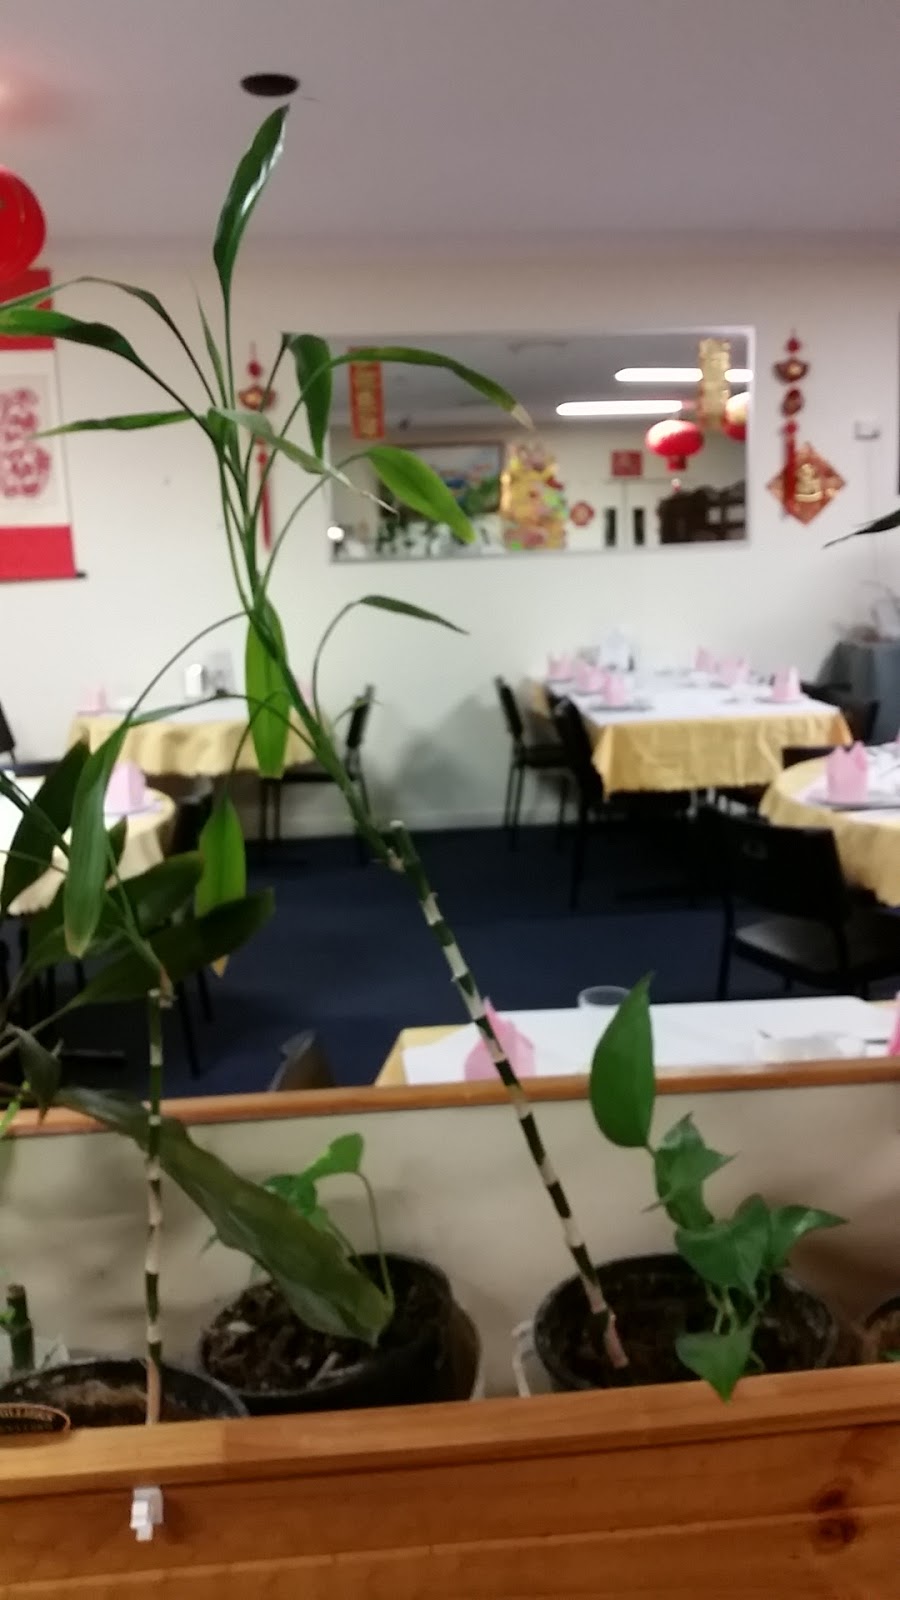 Boonah Chinese Restaurant | restaurant | 41 Yeates Ave, Boonah QLD 4310, Australia | 0754632807 OR +61 7 5463 2807